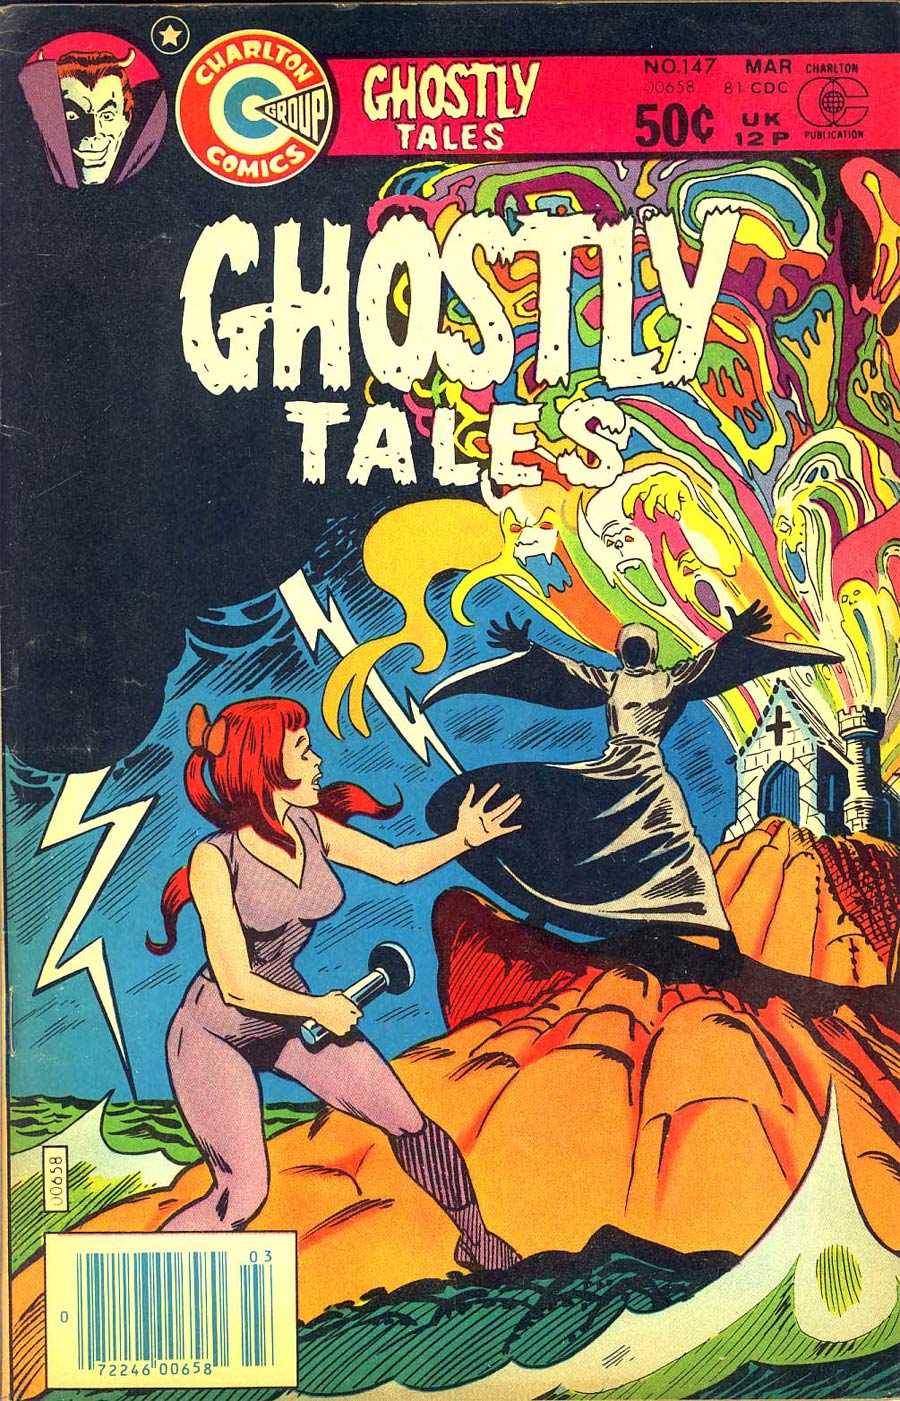 Ghostly Tales #147